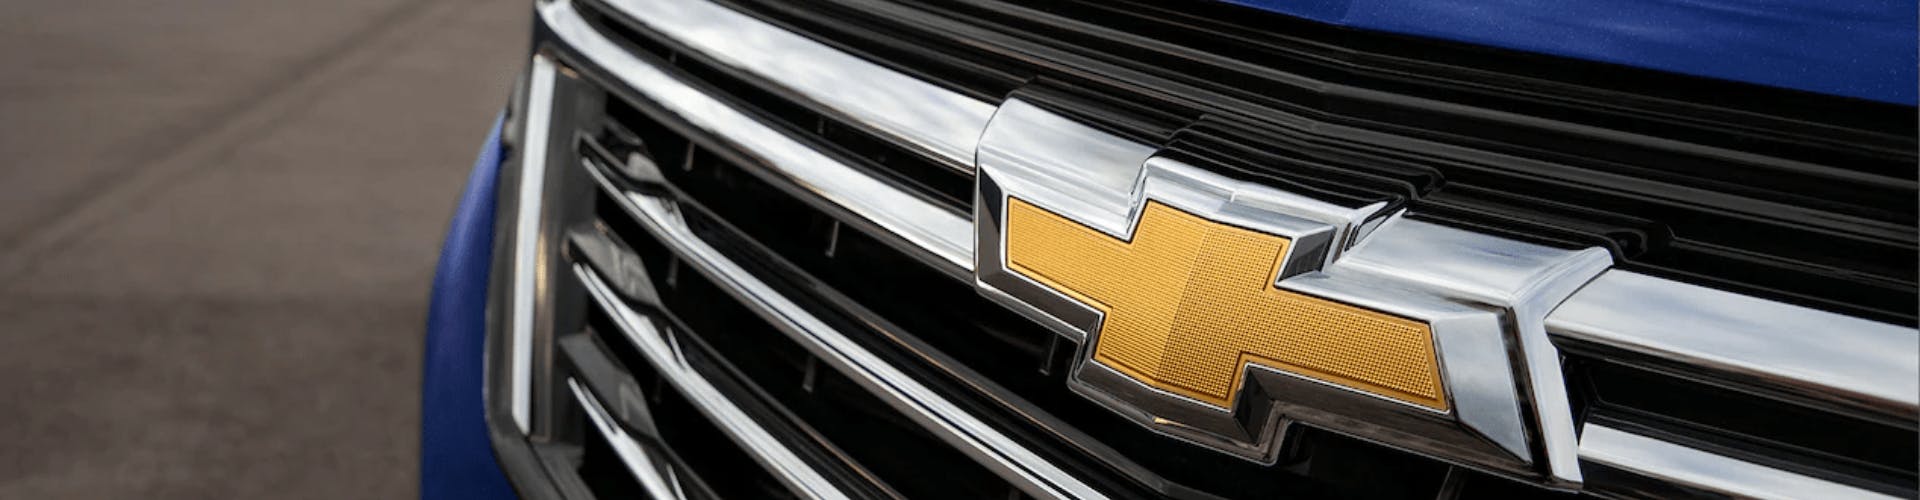 chevy logo om grille